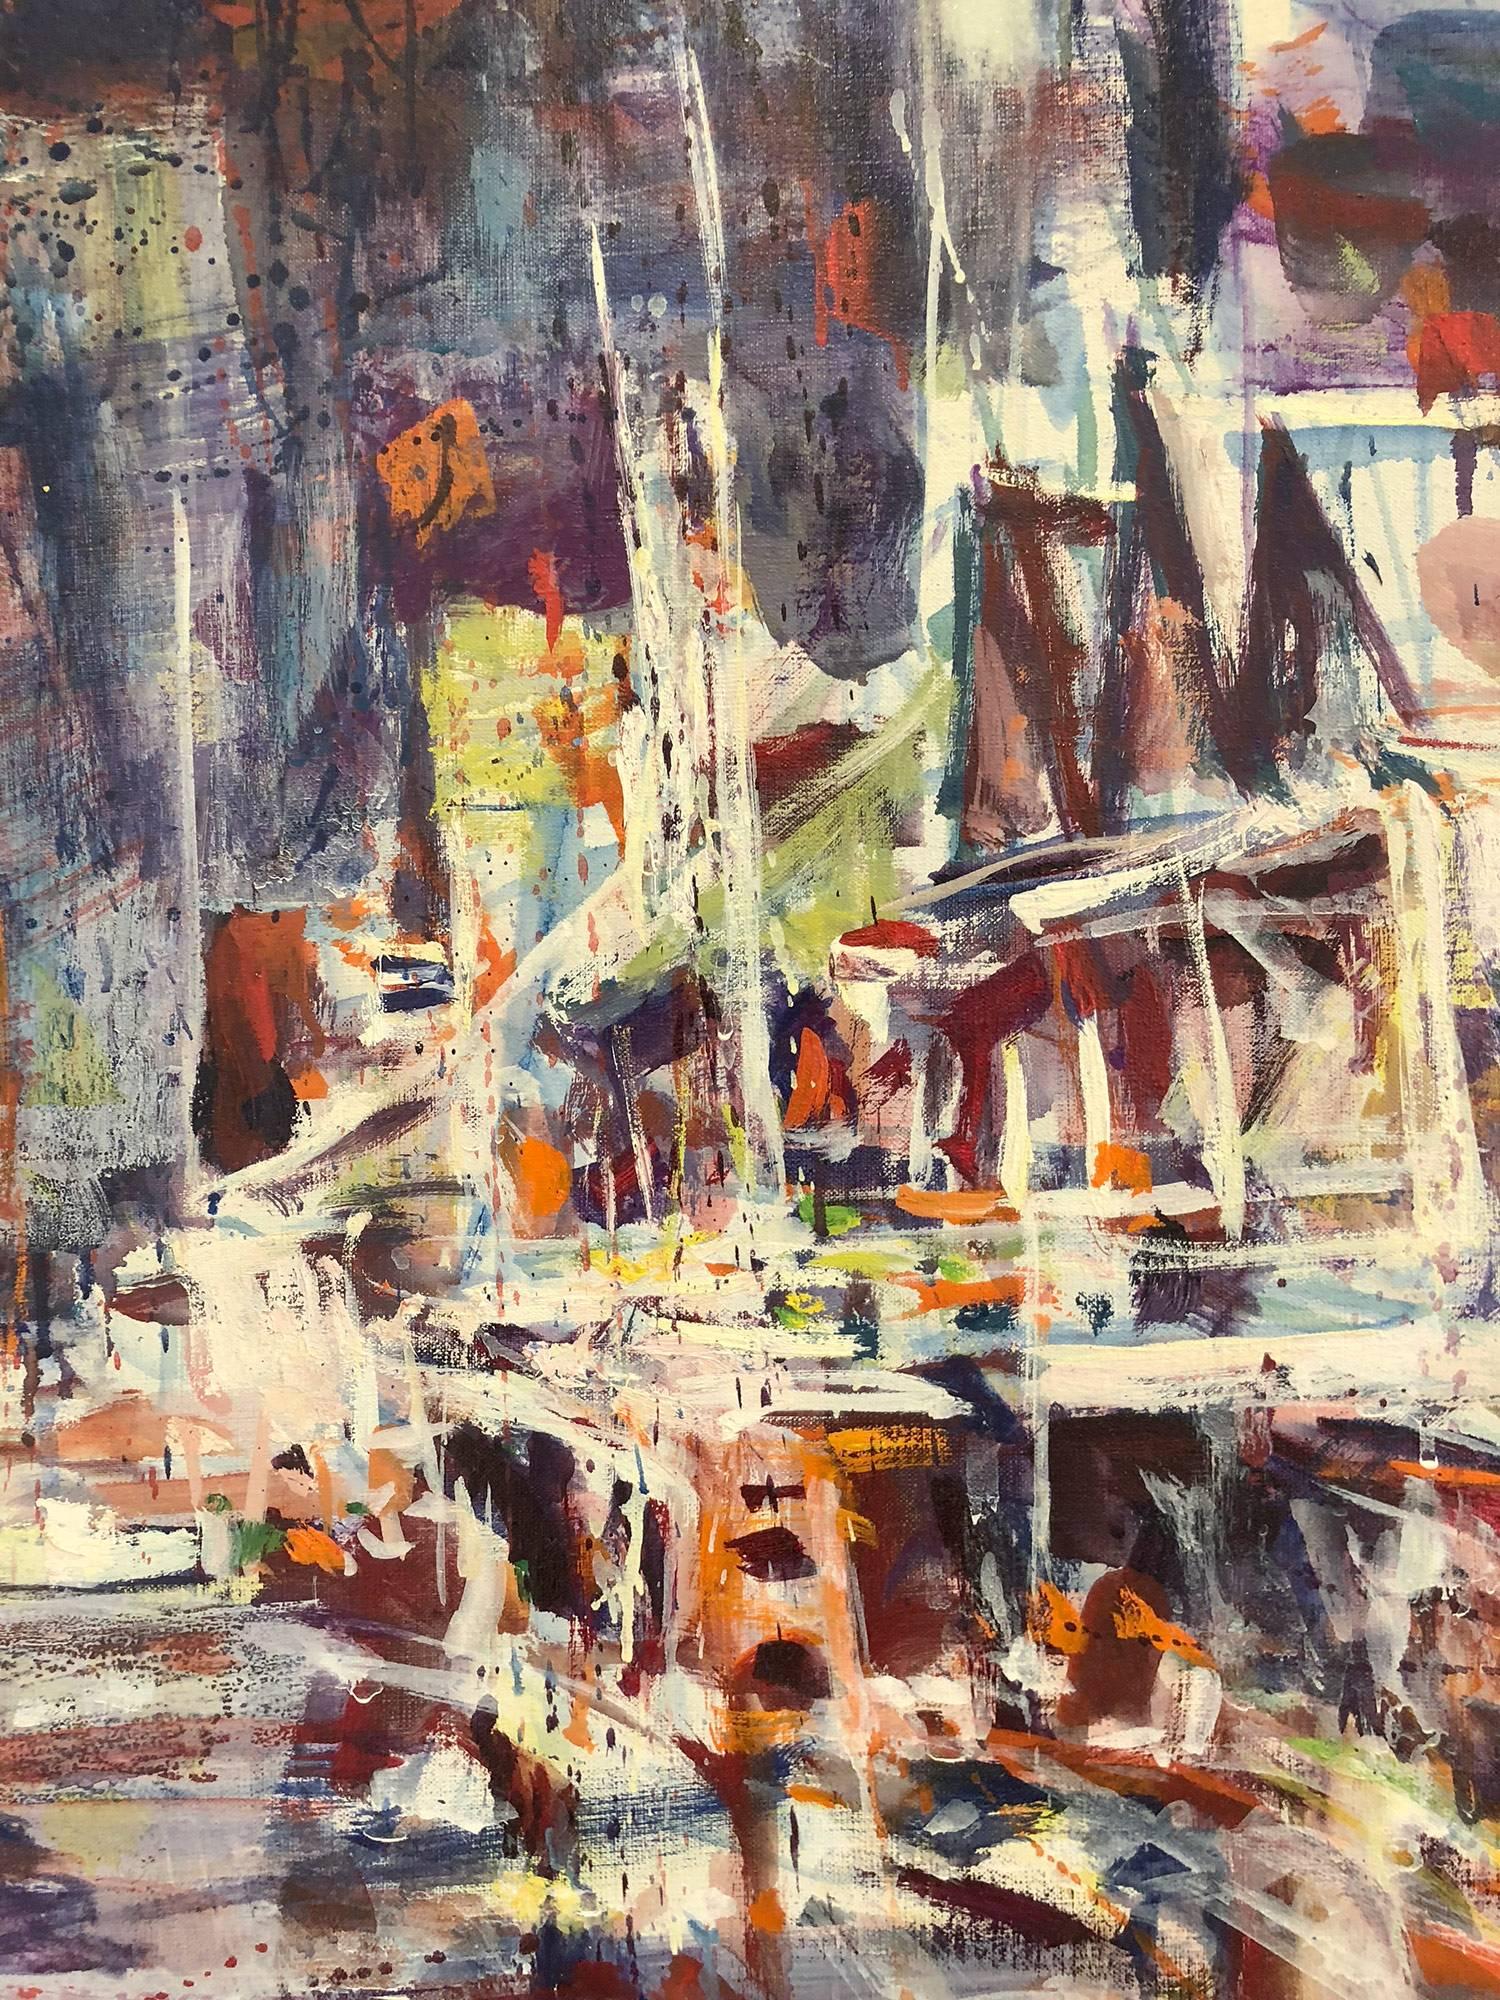 Large Abstract Harbor Scene - Painting by Robert Freiman